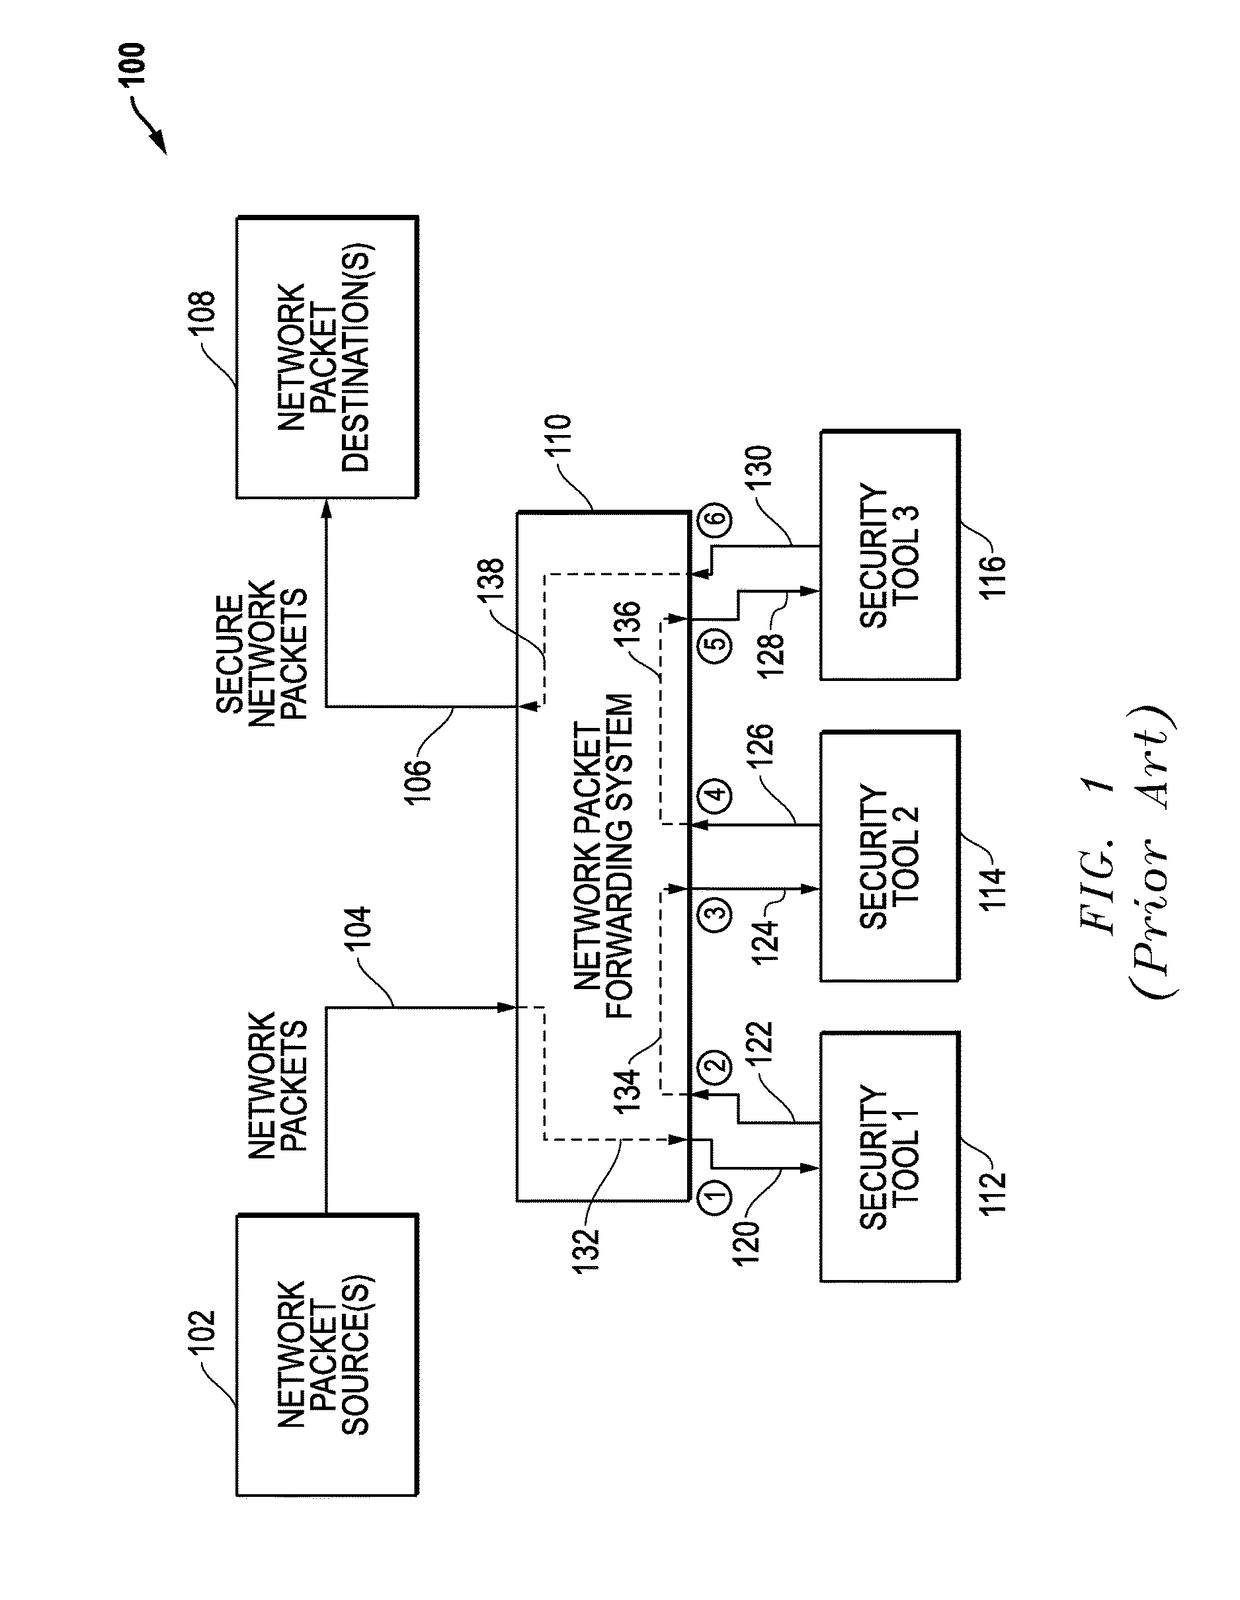 Latency-Based Timeouts For Concurrent Security Processing Of Network Packets By Multiple In-Line Network Security Tools